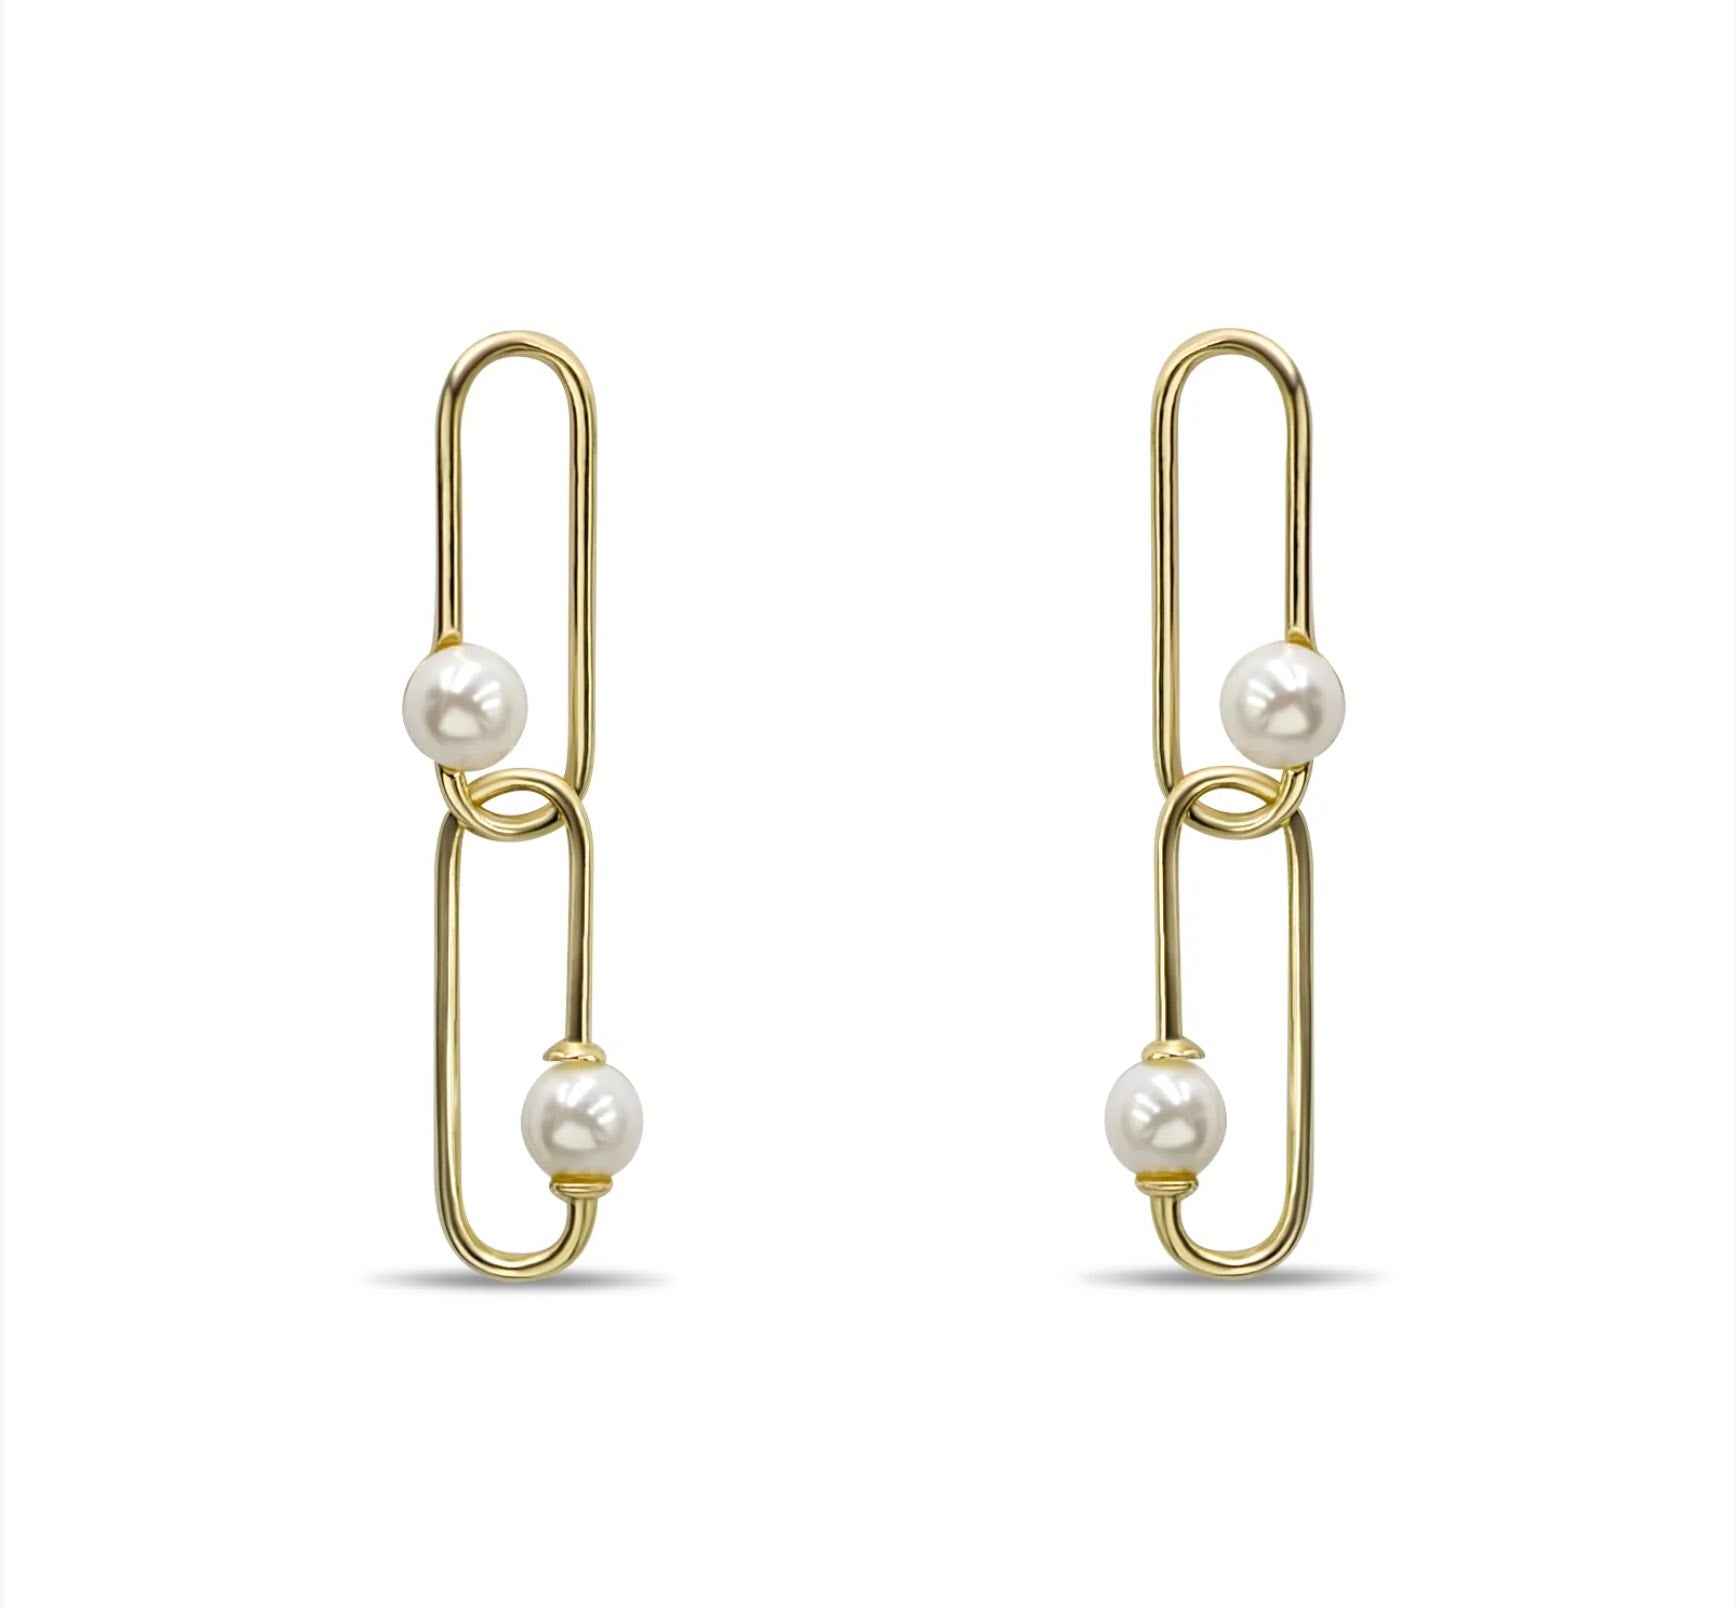 Gold link earrings with pearls on white background- Camille Jewelry